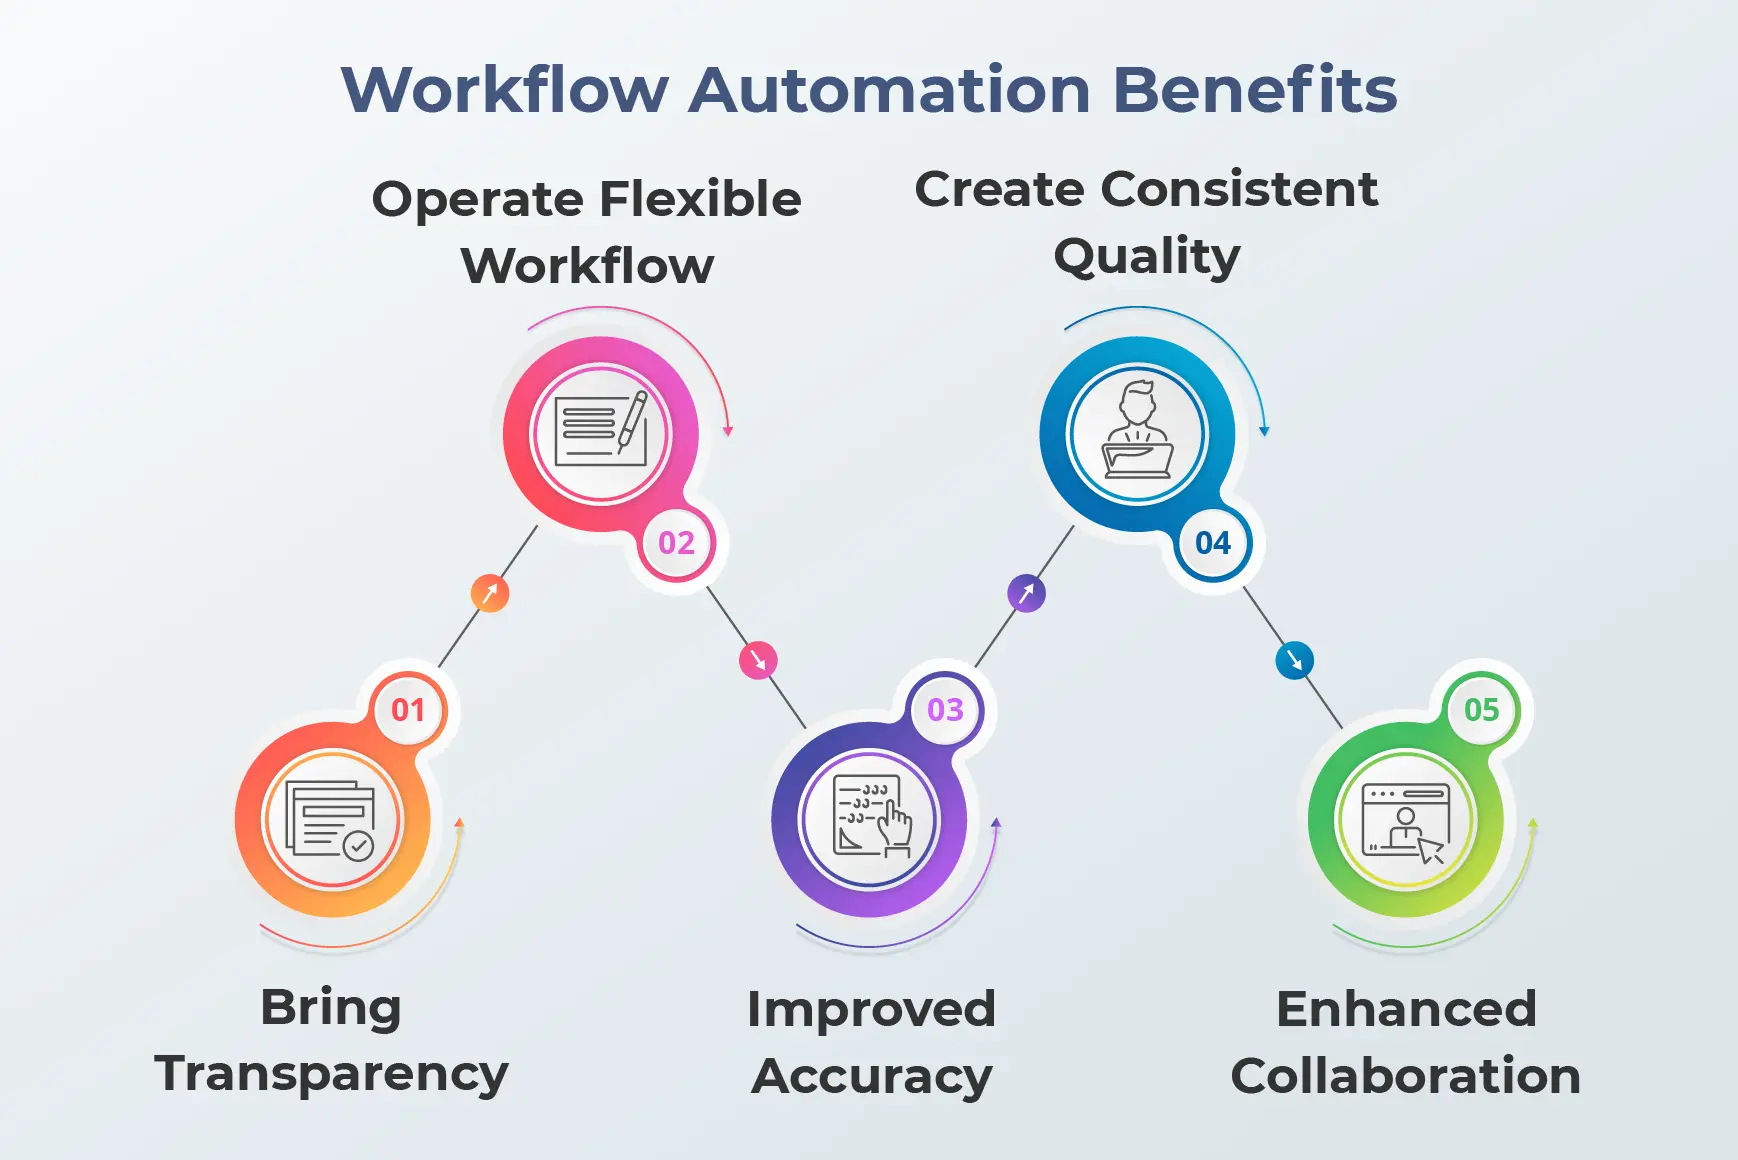 Benefits of Workflow Automation